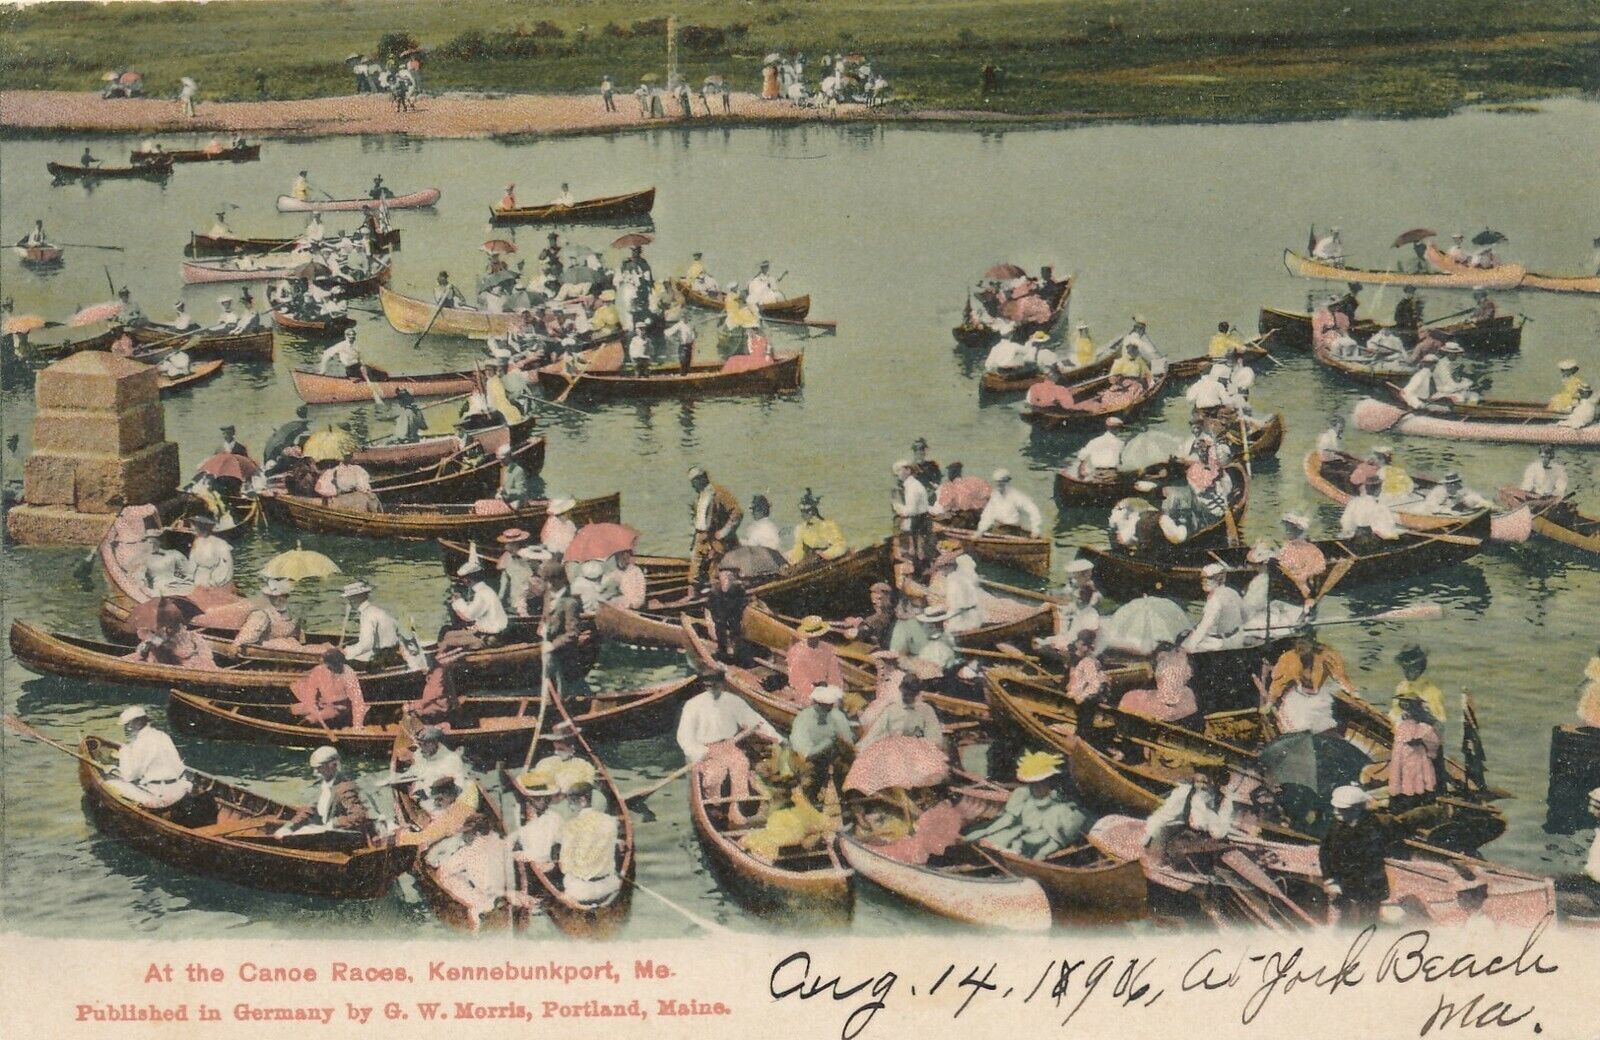 KENNEBUNKPORT ME – At the Canoe Races – udb (pre 1908)